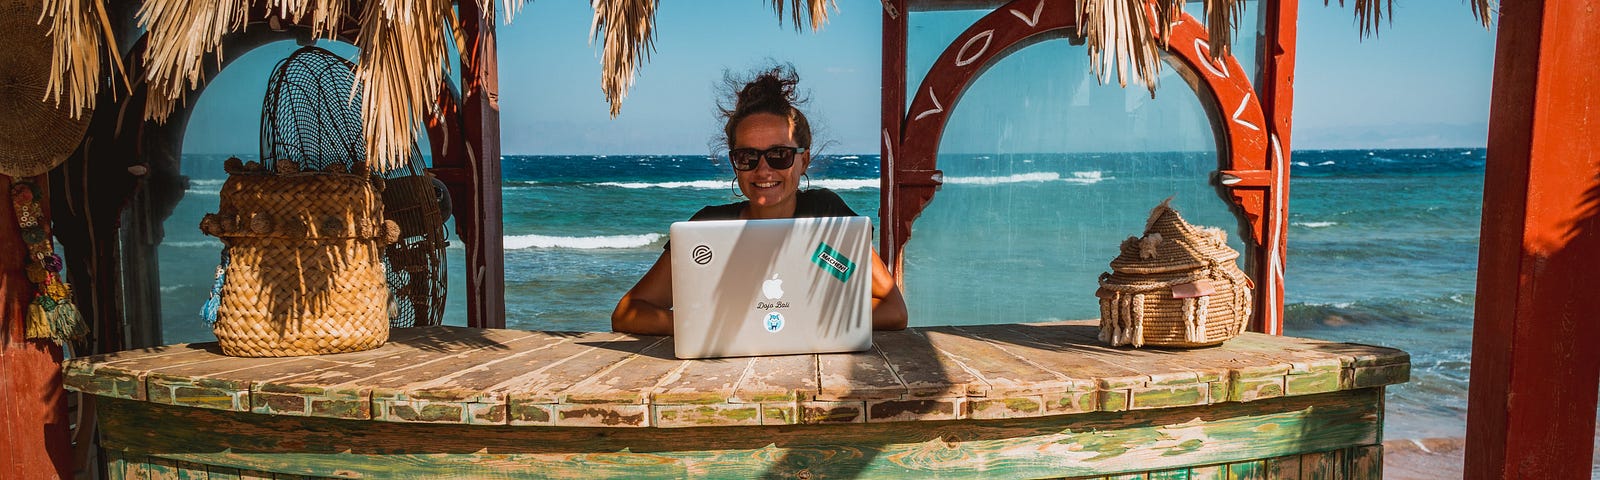 A digital nomad girl working on her Macbook laptop in front of the sea